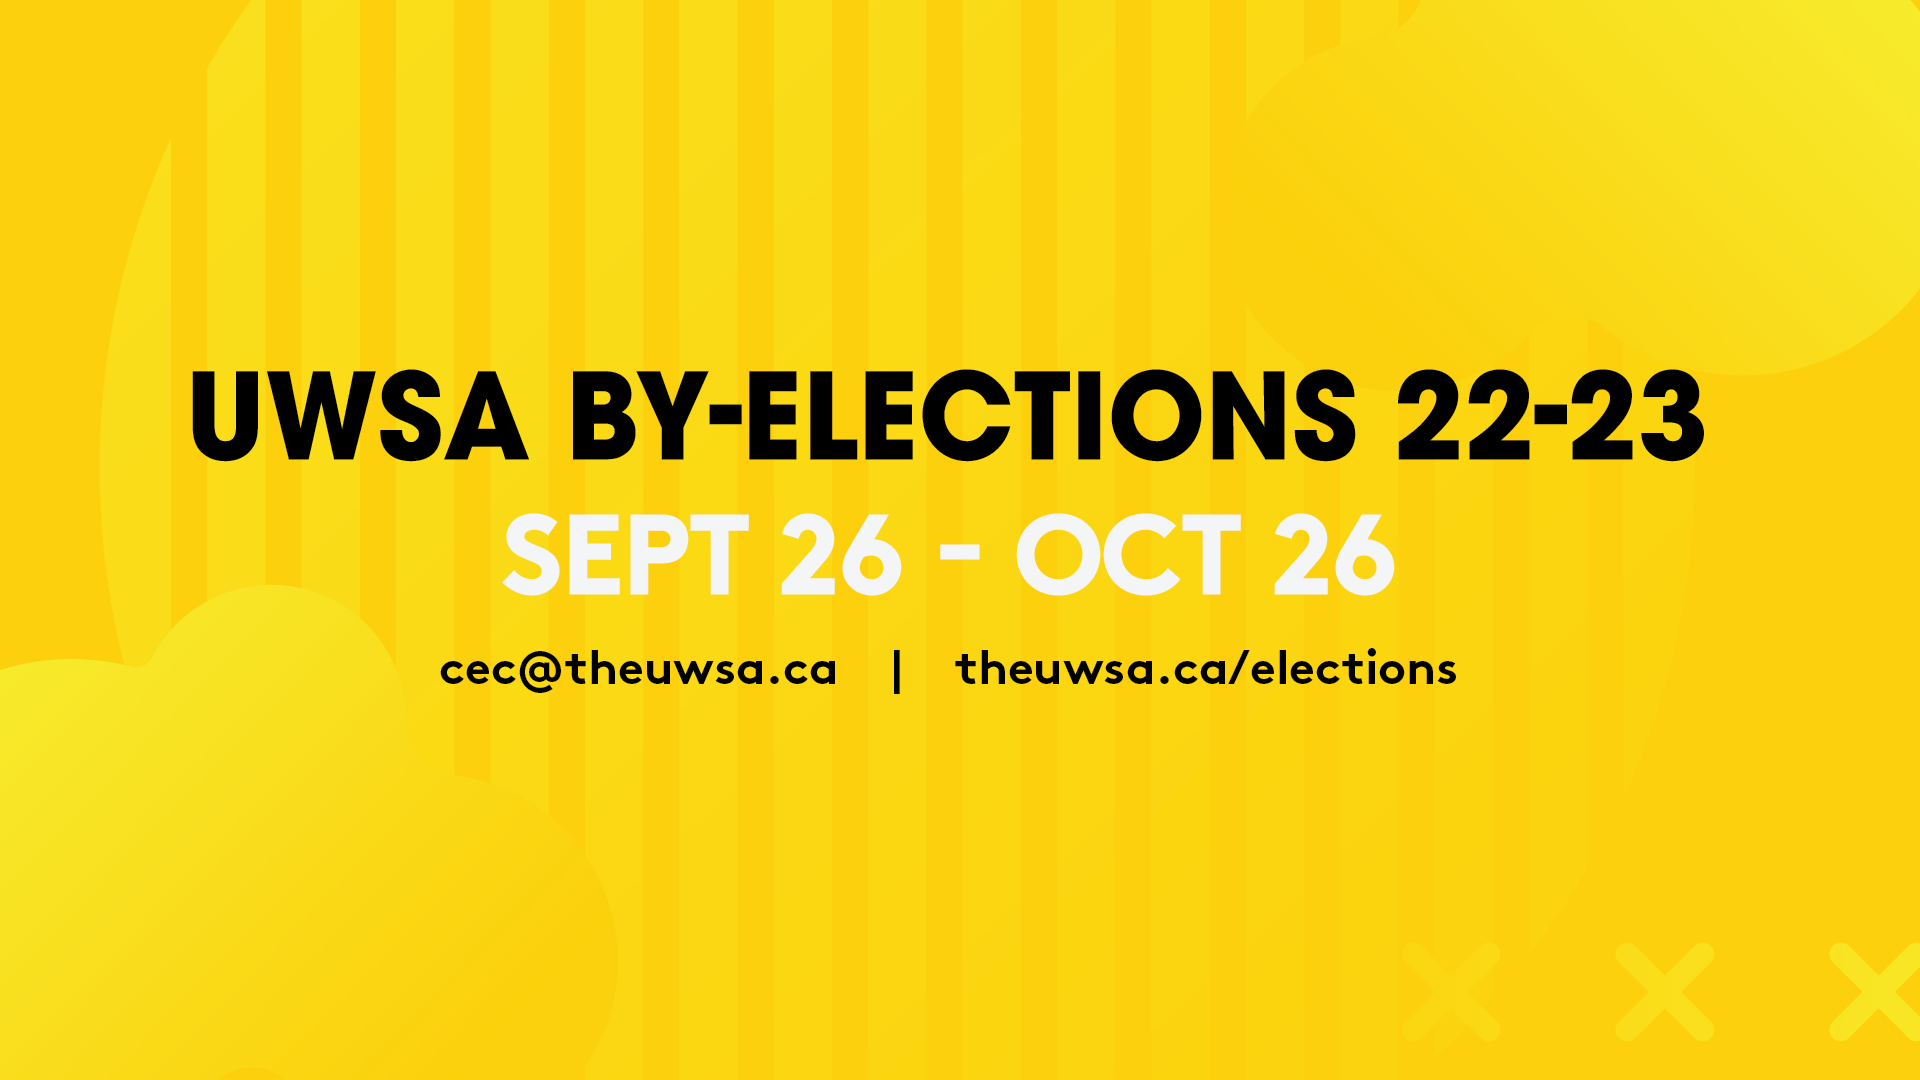 UWSA By-Elections 2022